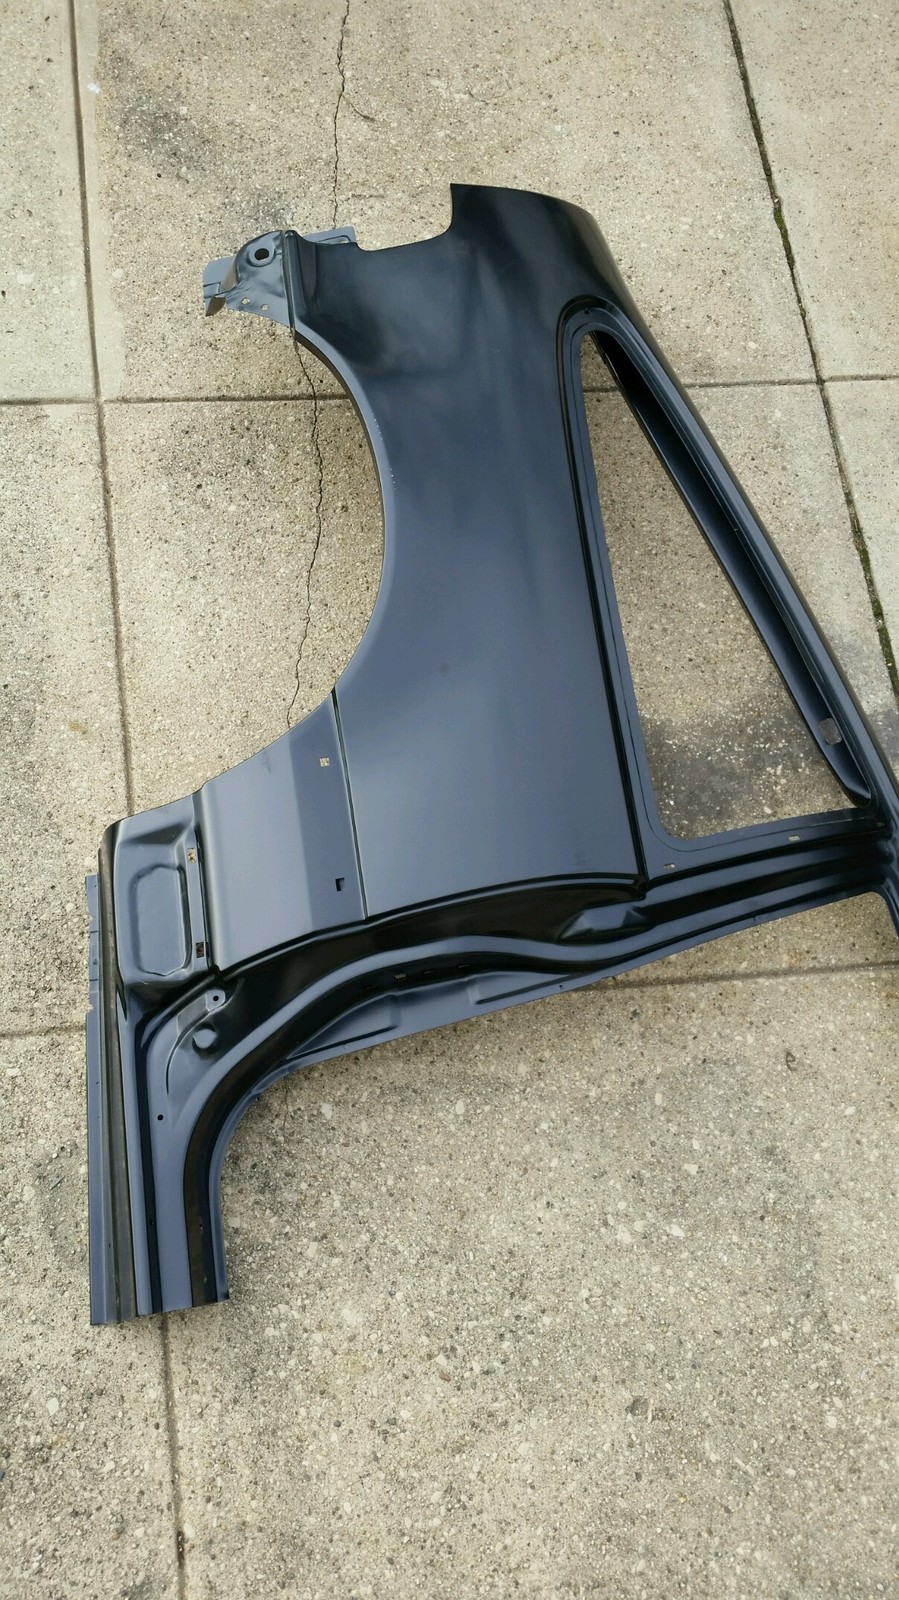 Replacement Quarter Panels from Honda